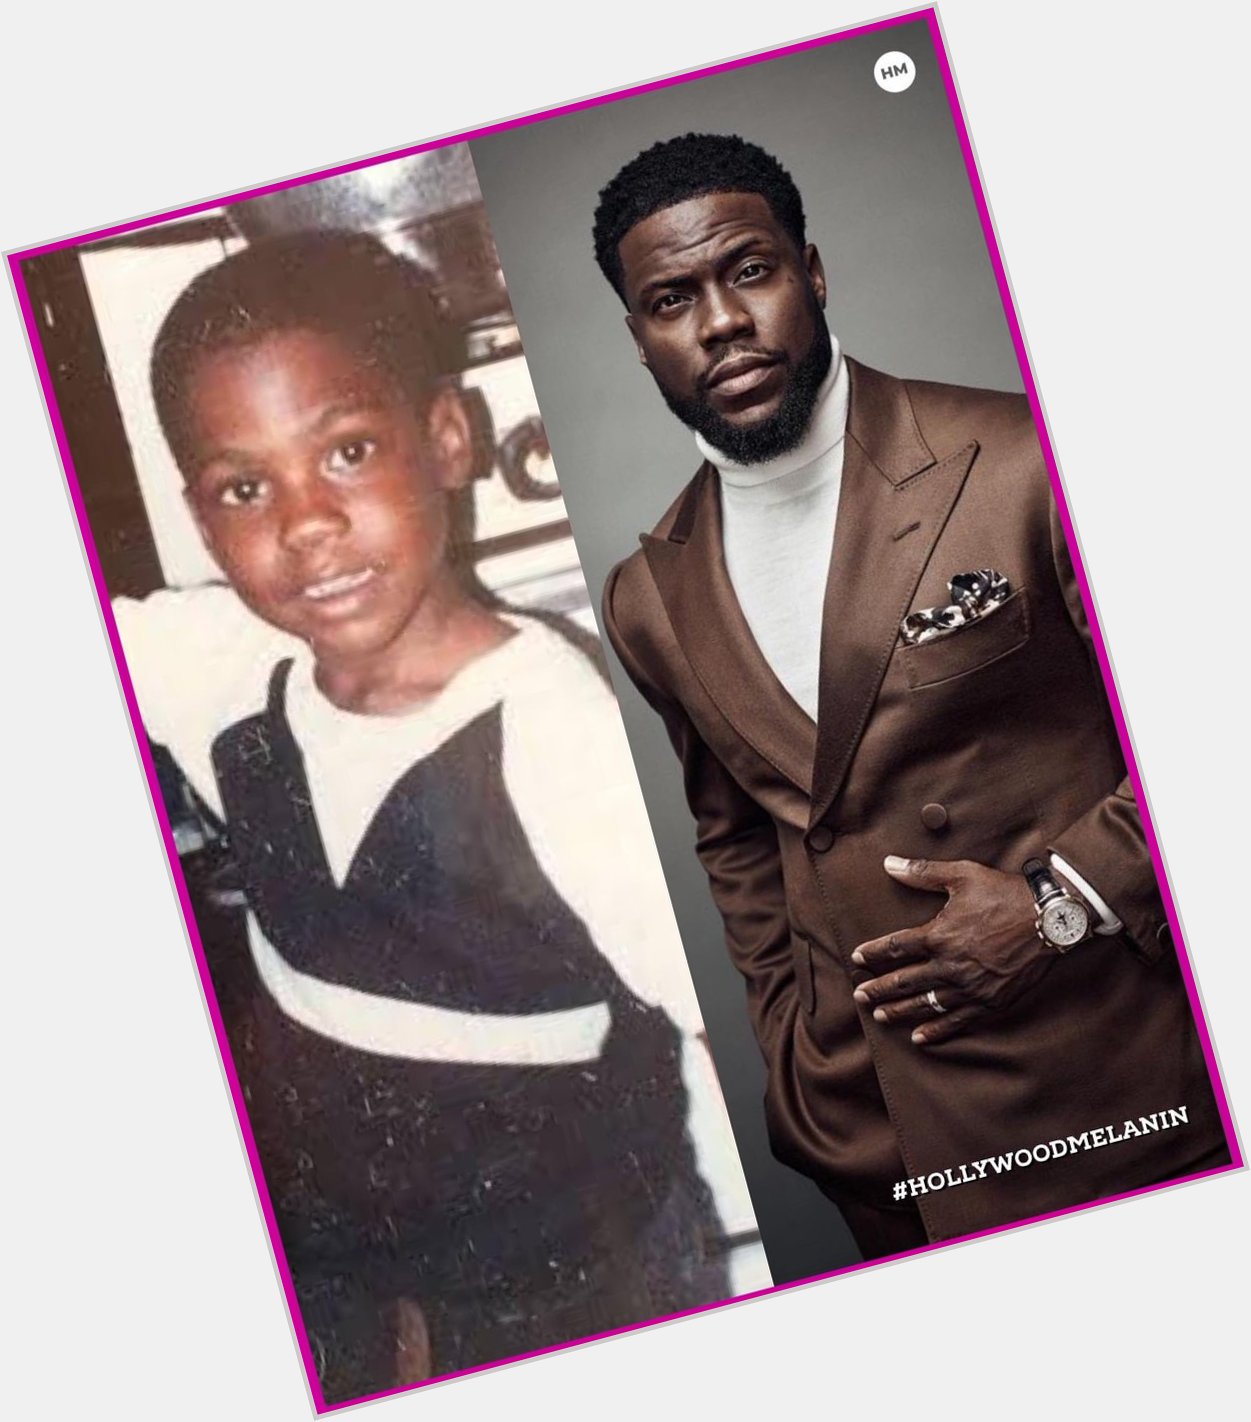 Join us in wishing a happy birthday to Kevin Hart!  